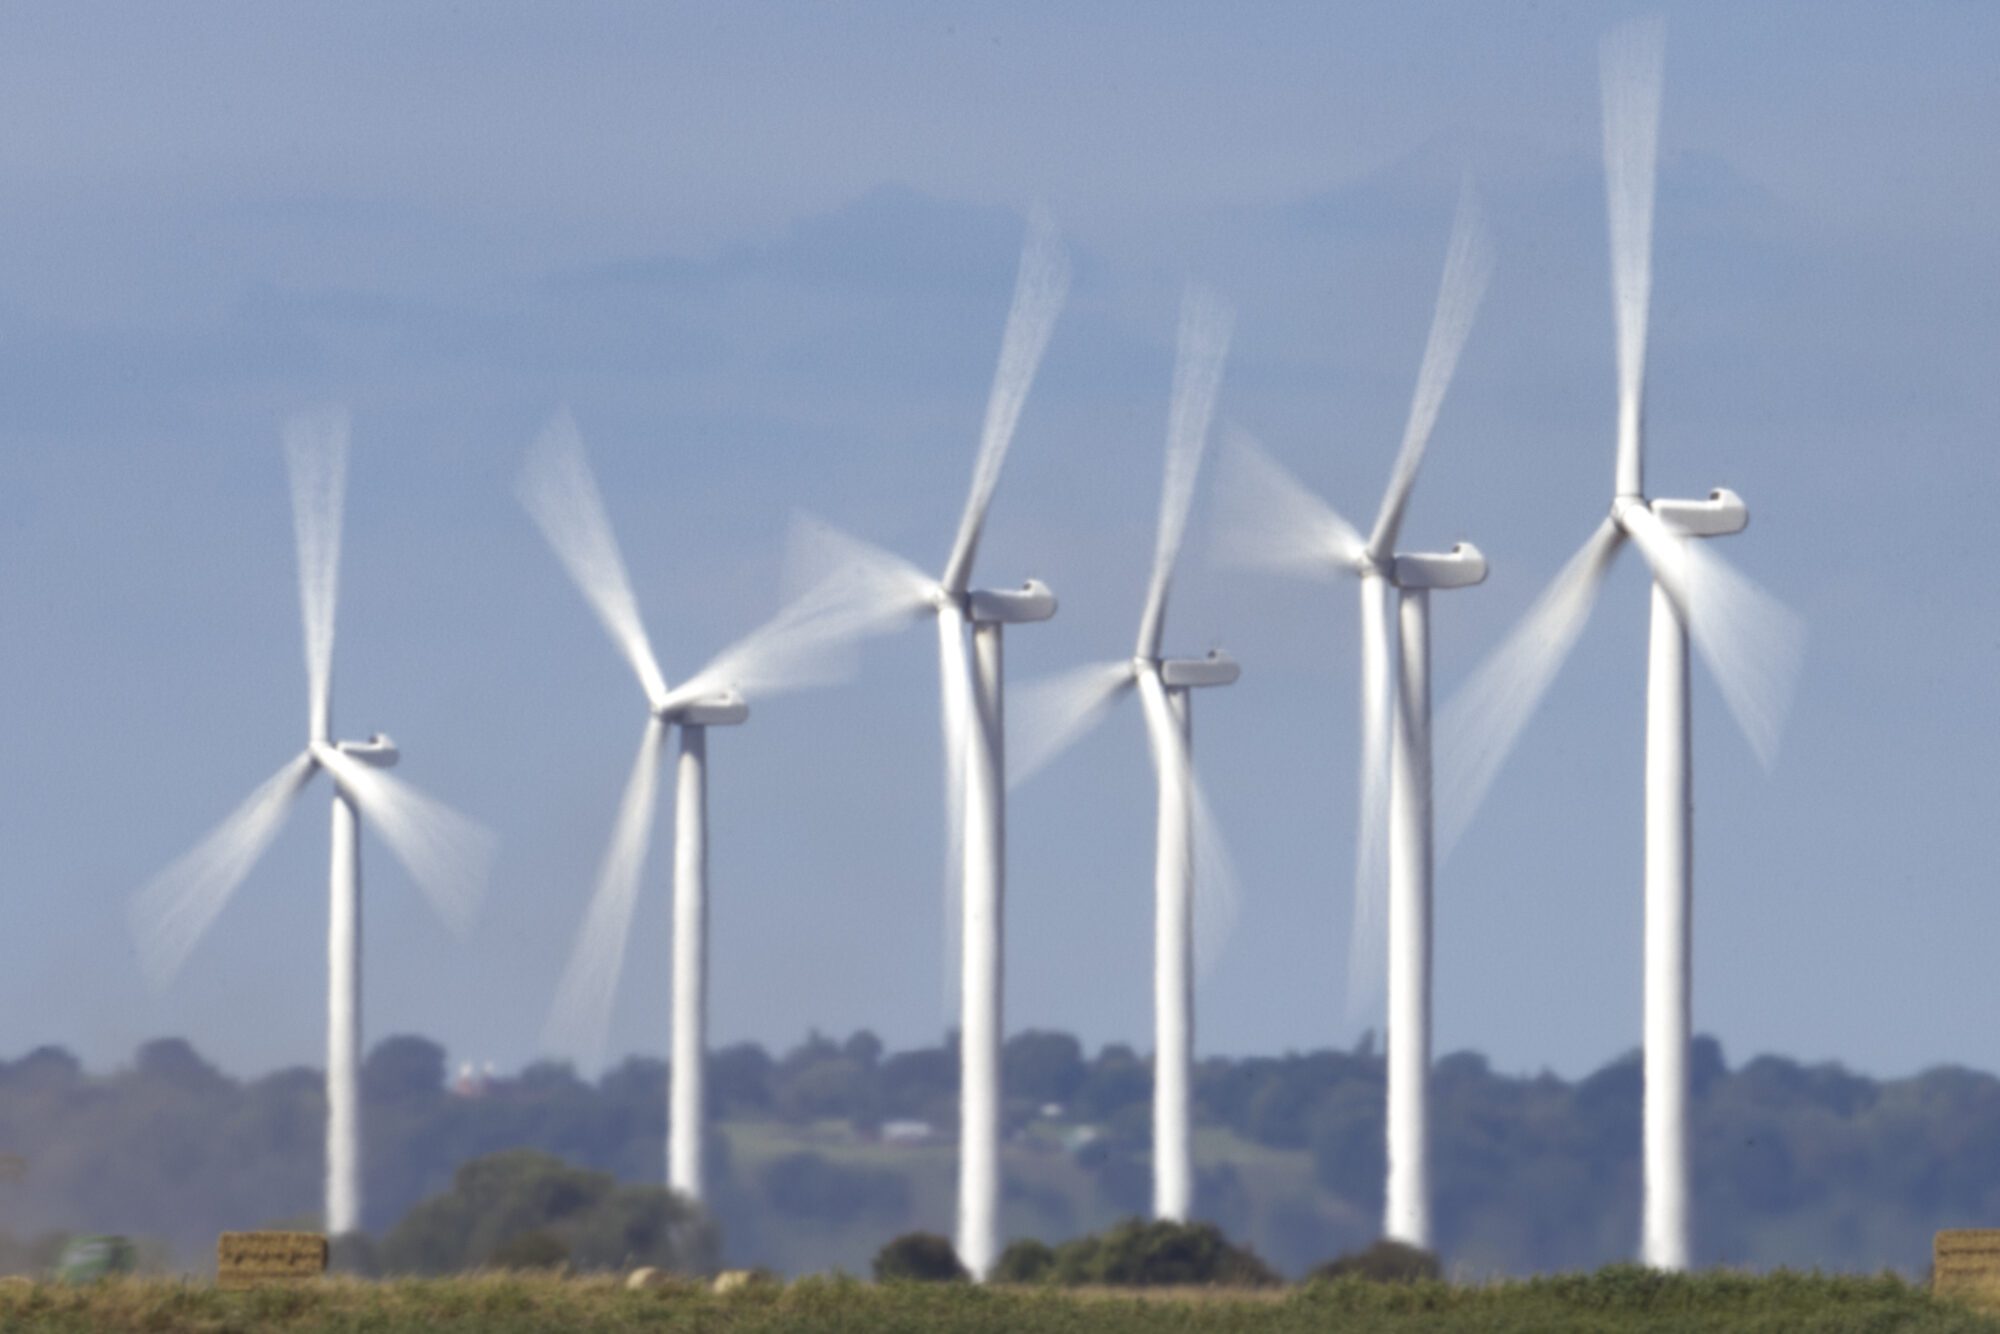 Wind turbines with their blades motionblurred